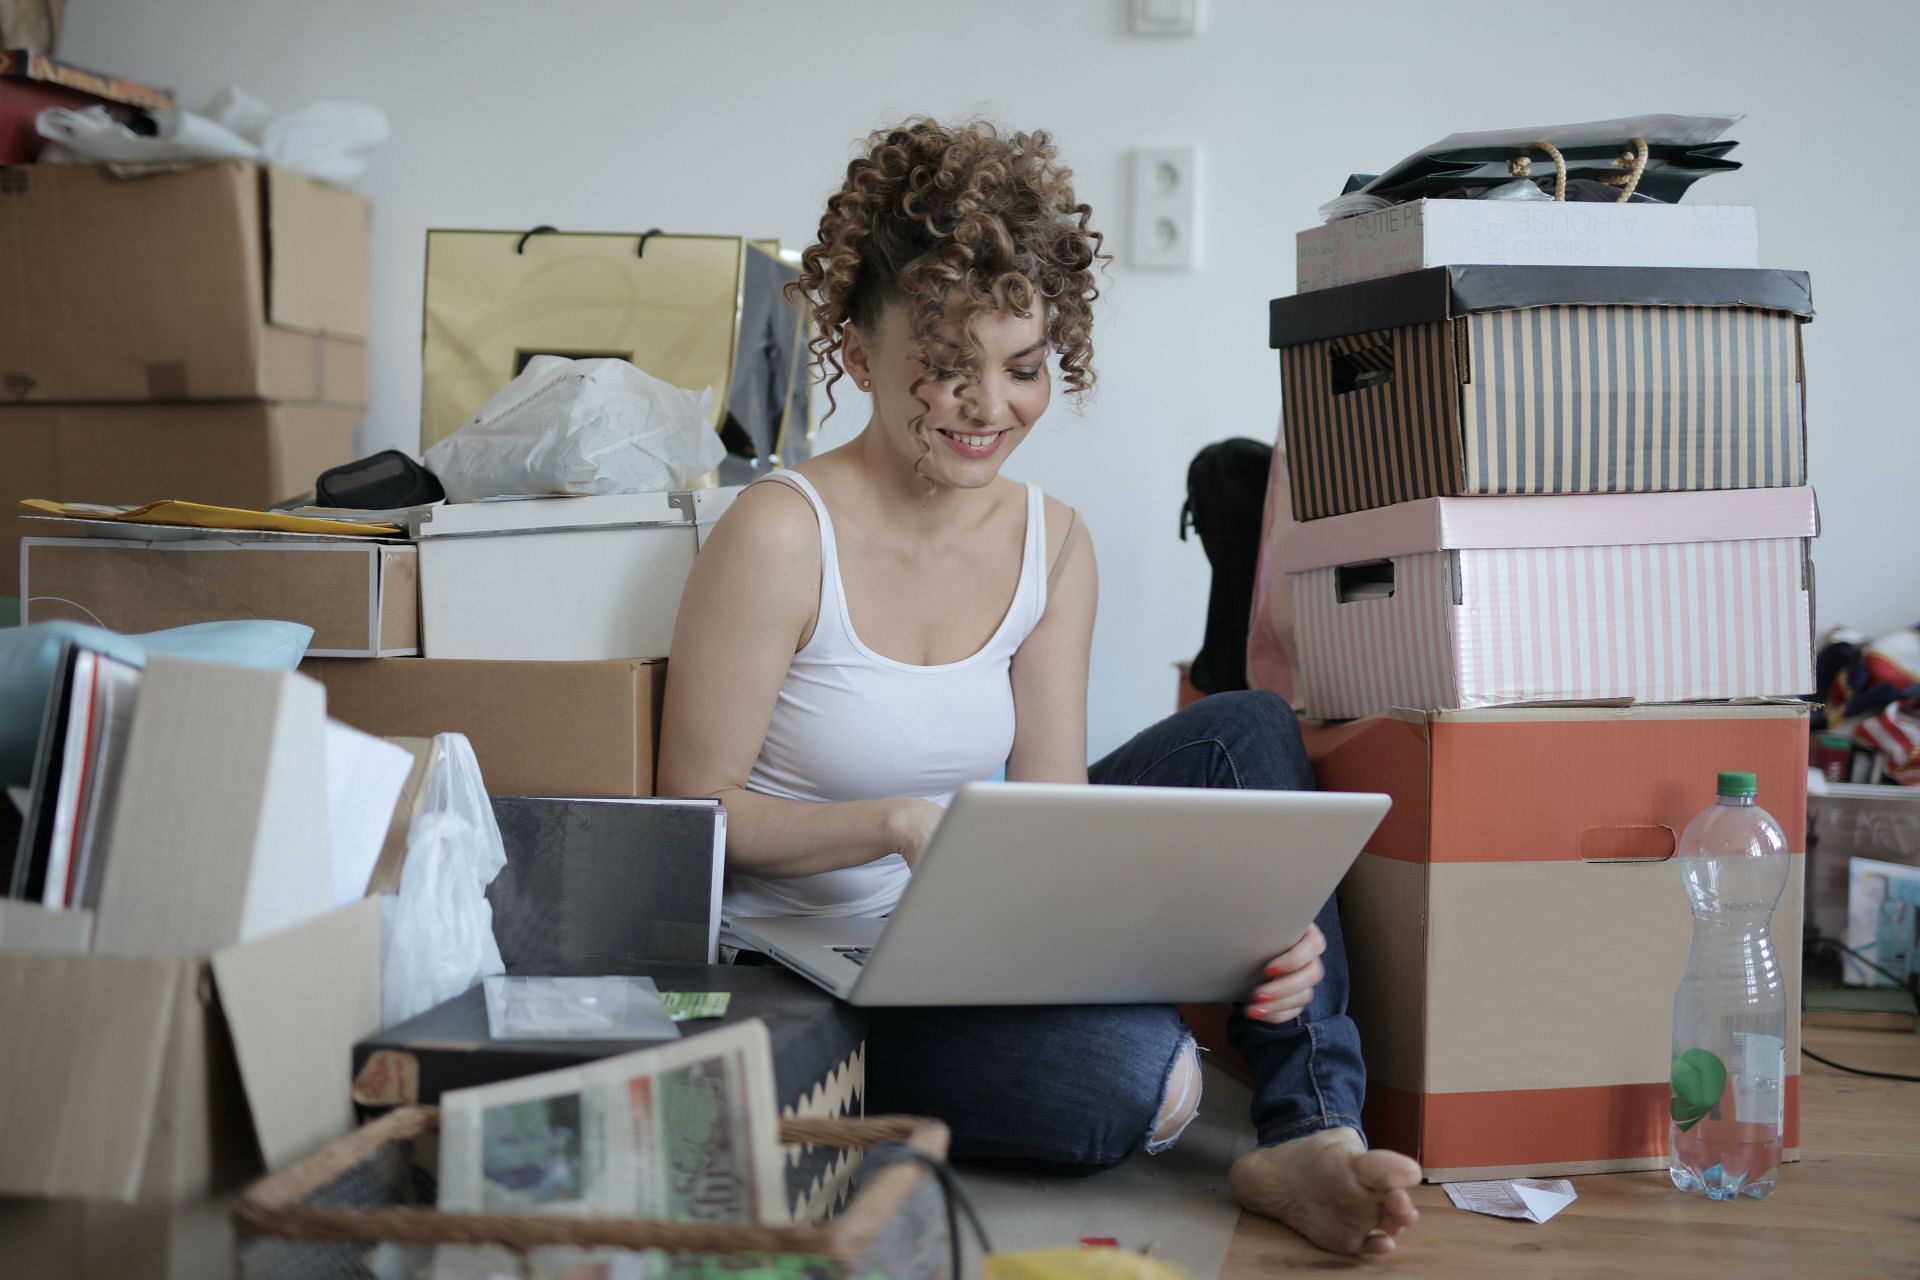 Decluttering may take time but it has long-term benefits! (Photo via Pexels/ Andrea Piacquadio)